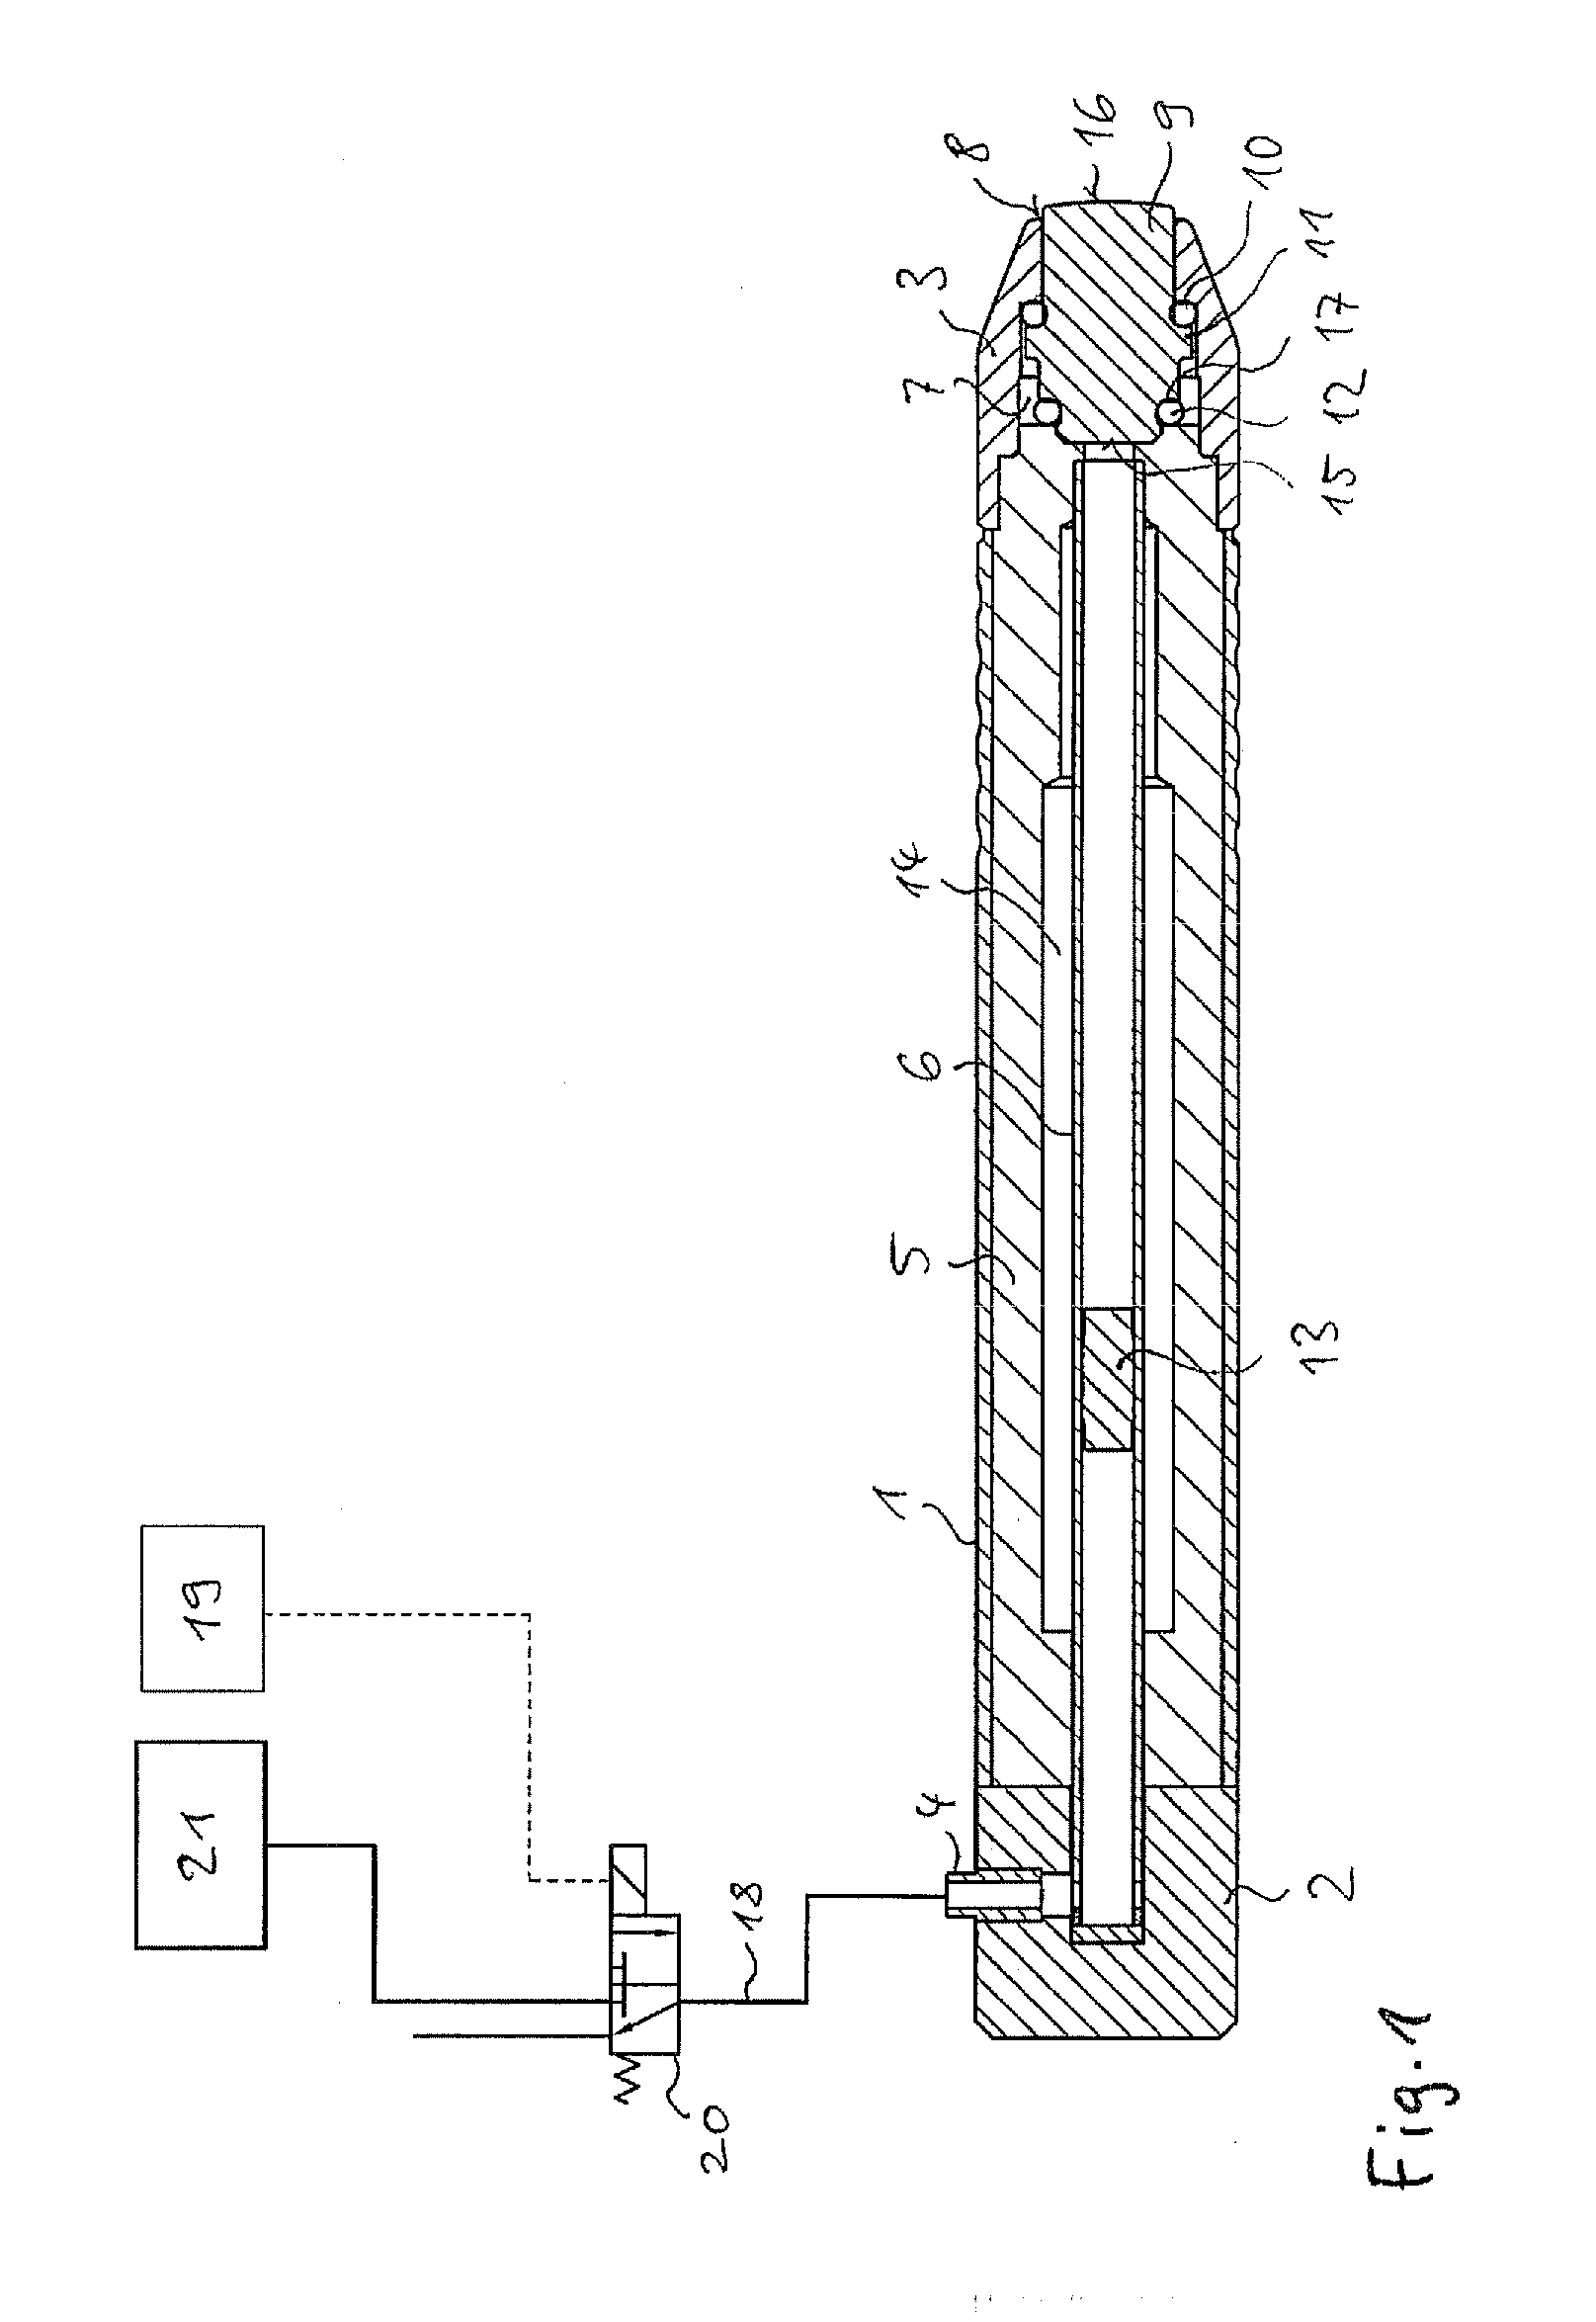 Apparatus for treating biological body substances by mechanical shockwaves